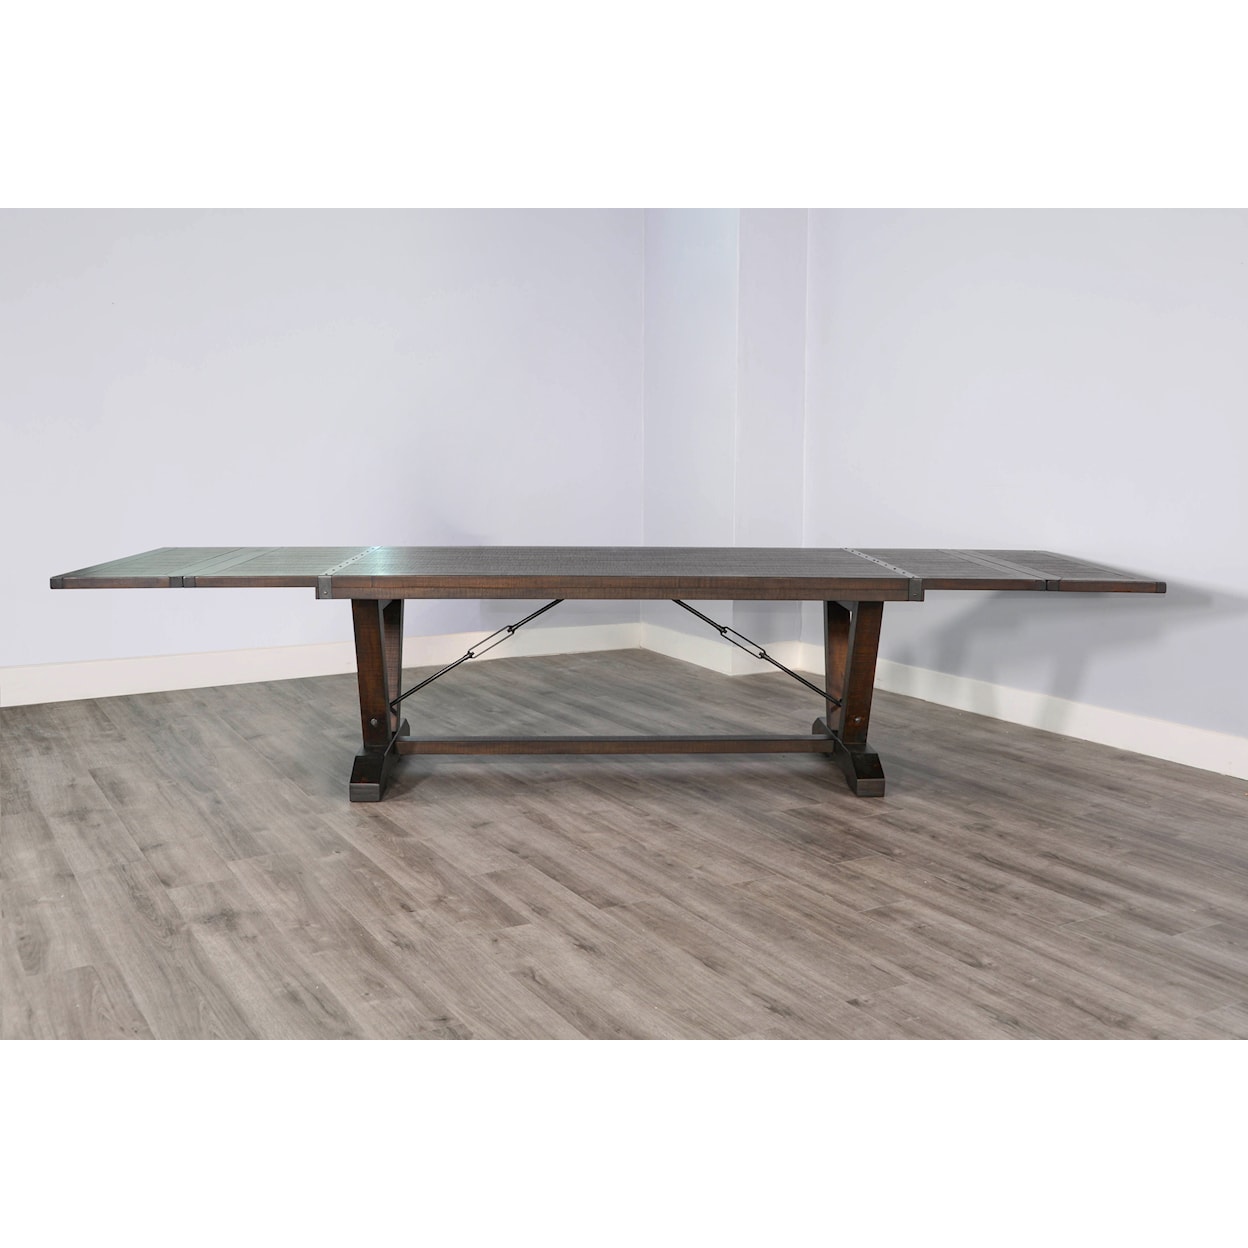 Sunny Designs Homestead Ext. Table w/ Folding Leaves